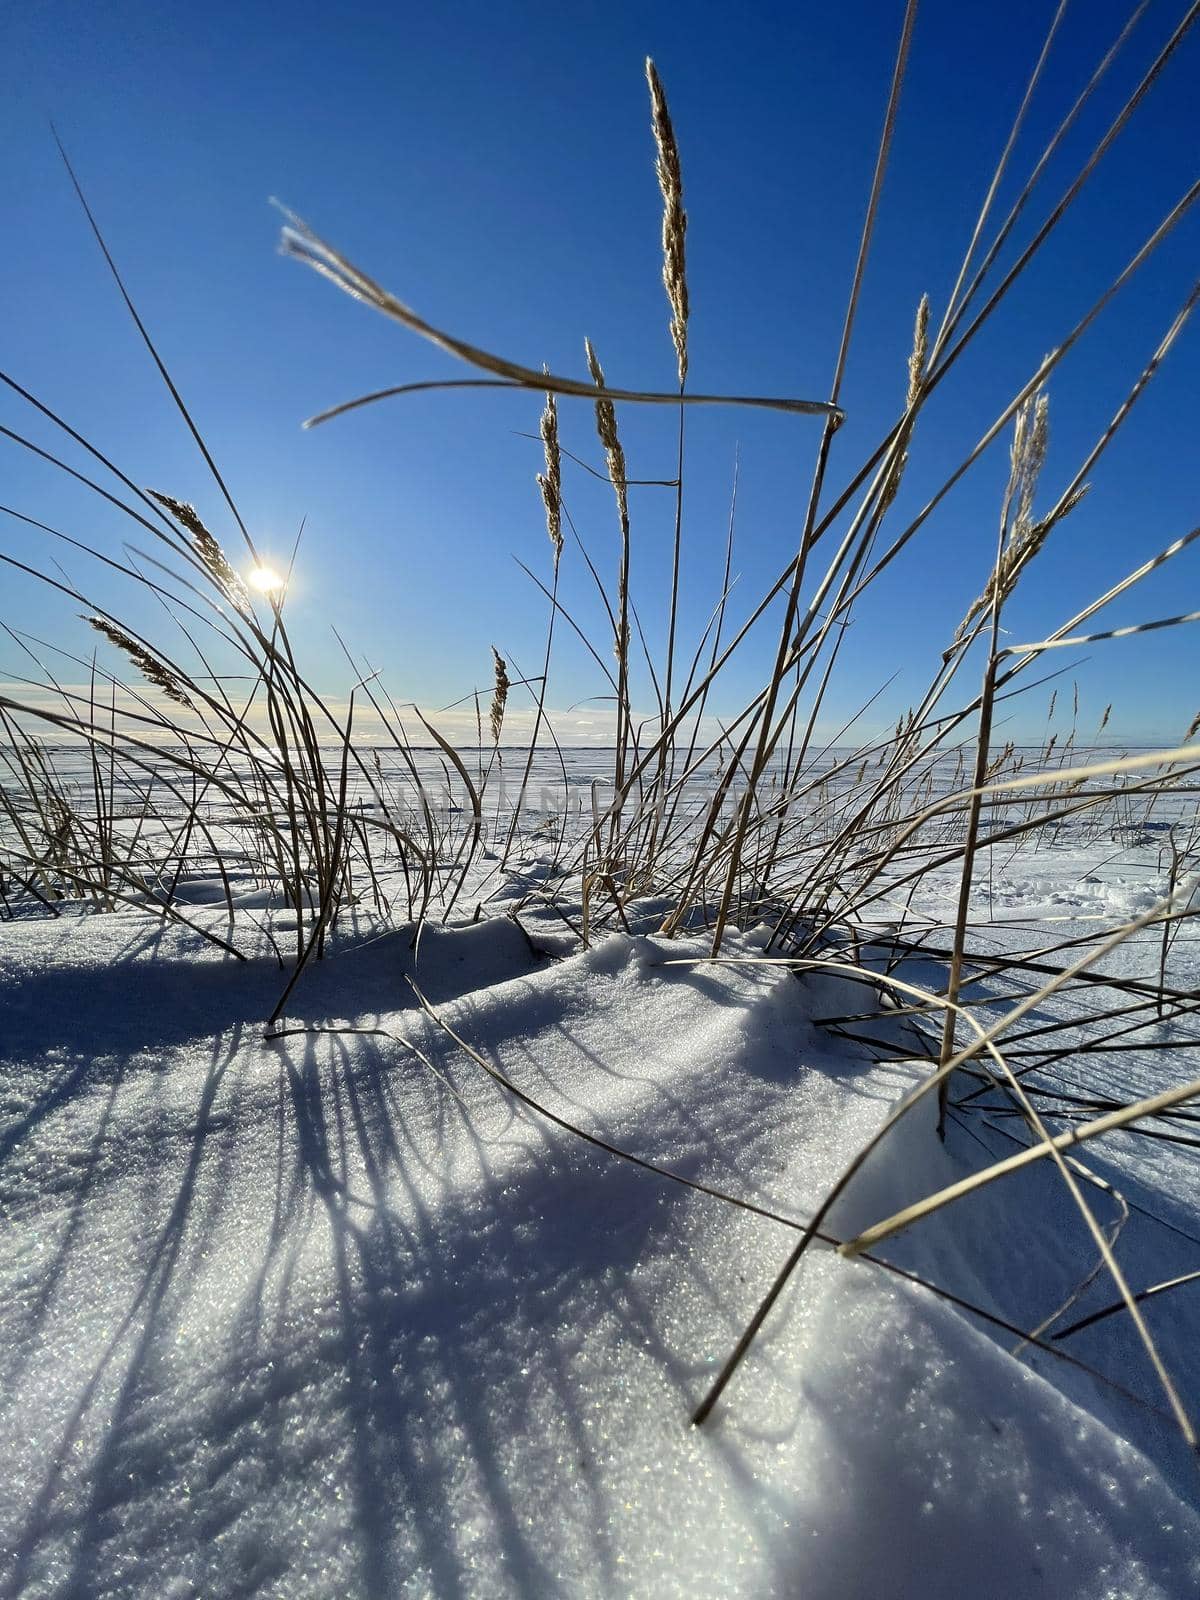 The dry grass ears on a wind on a snow-covered field in clear sunny frosty weather, long shadows from stalks on snow, a deserted place, boundless space, the clear blue sky by vladimirdrozdin